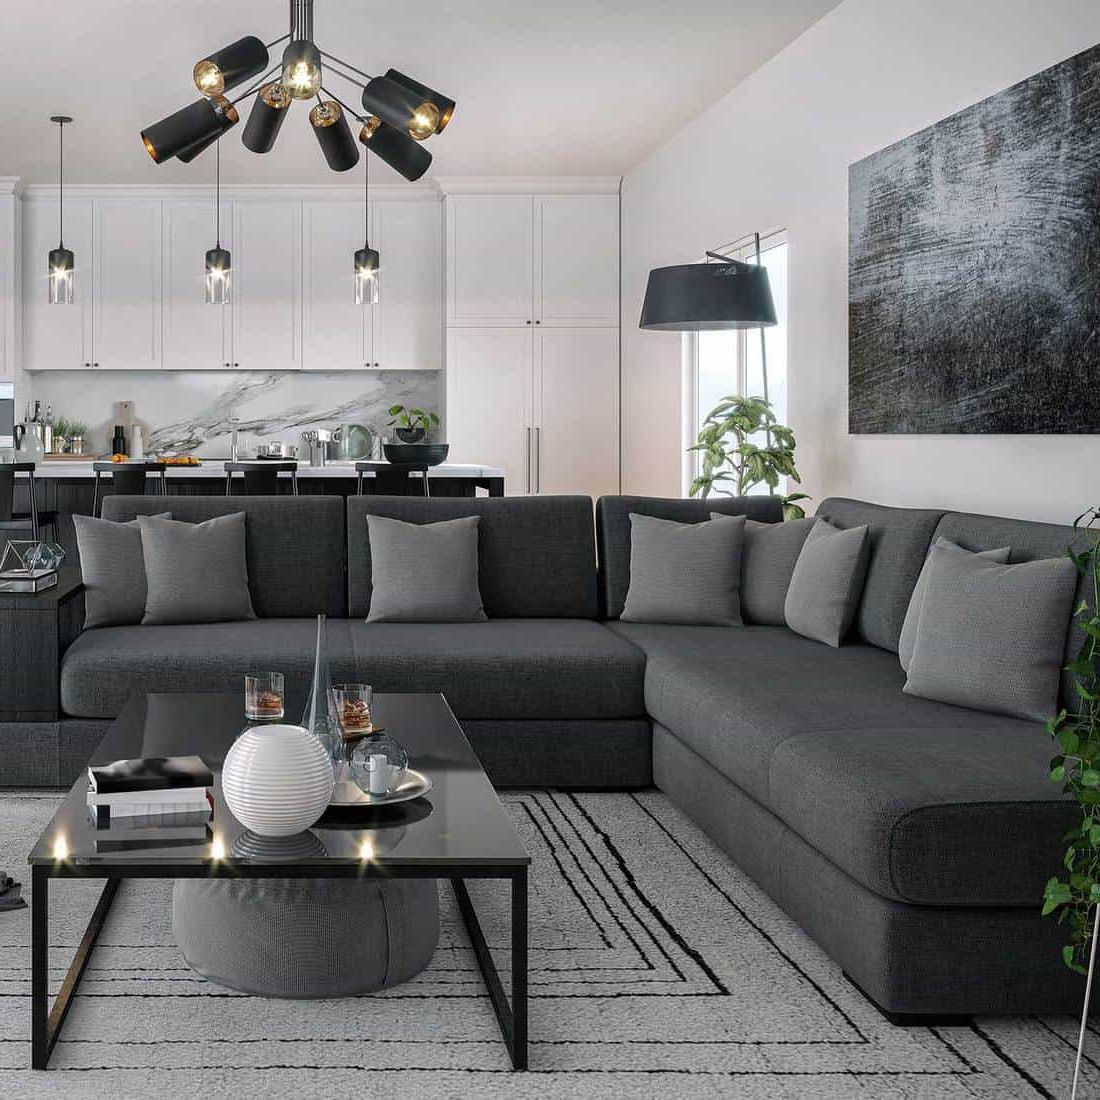 [%34 Gray Couch Living Room Ideas [inc. Photos] Within Most Recently Released Sofas In Dark Gray|sofas In Dark Gray Throughout Most Recent 34 Gray Couch Living Room Ideas [inc. Photos]|most Up To Date Sofas In Dark Gray Intended For 34 Gray Couch Living Room Ideas [inc. Photos]|latest 34 Gray Couch Living Room Ideas [inc. Photos] Regarding Sofas In Dark Gray%] (Photo 9 of 15)